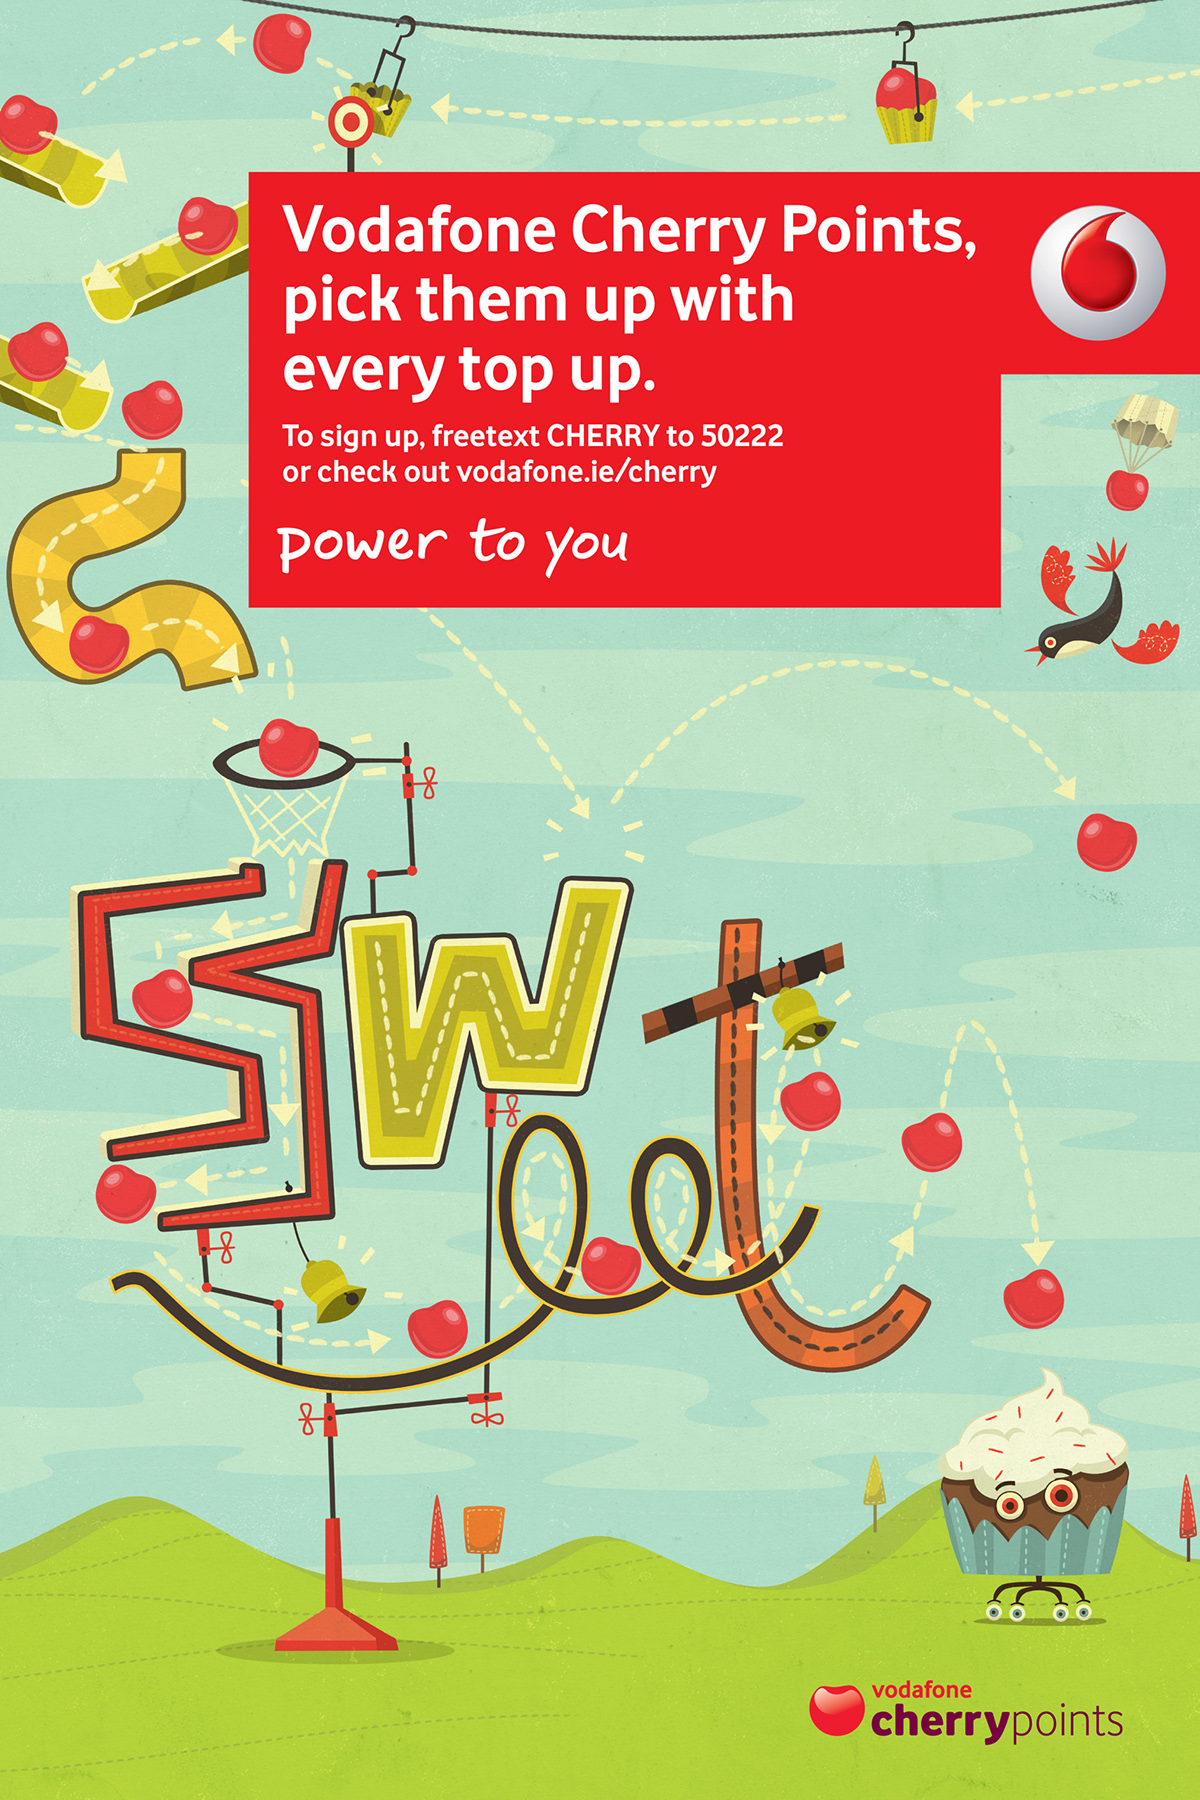 vodafone loyalty loyalty programme telecommunications fone power to you cherry points cupcakes